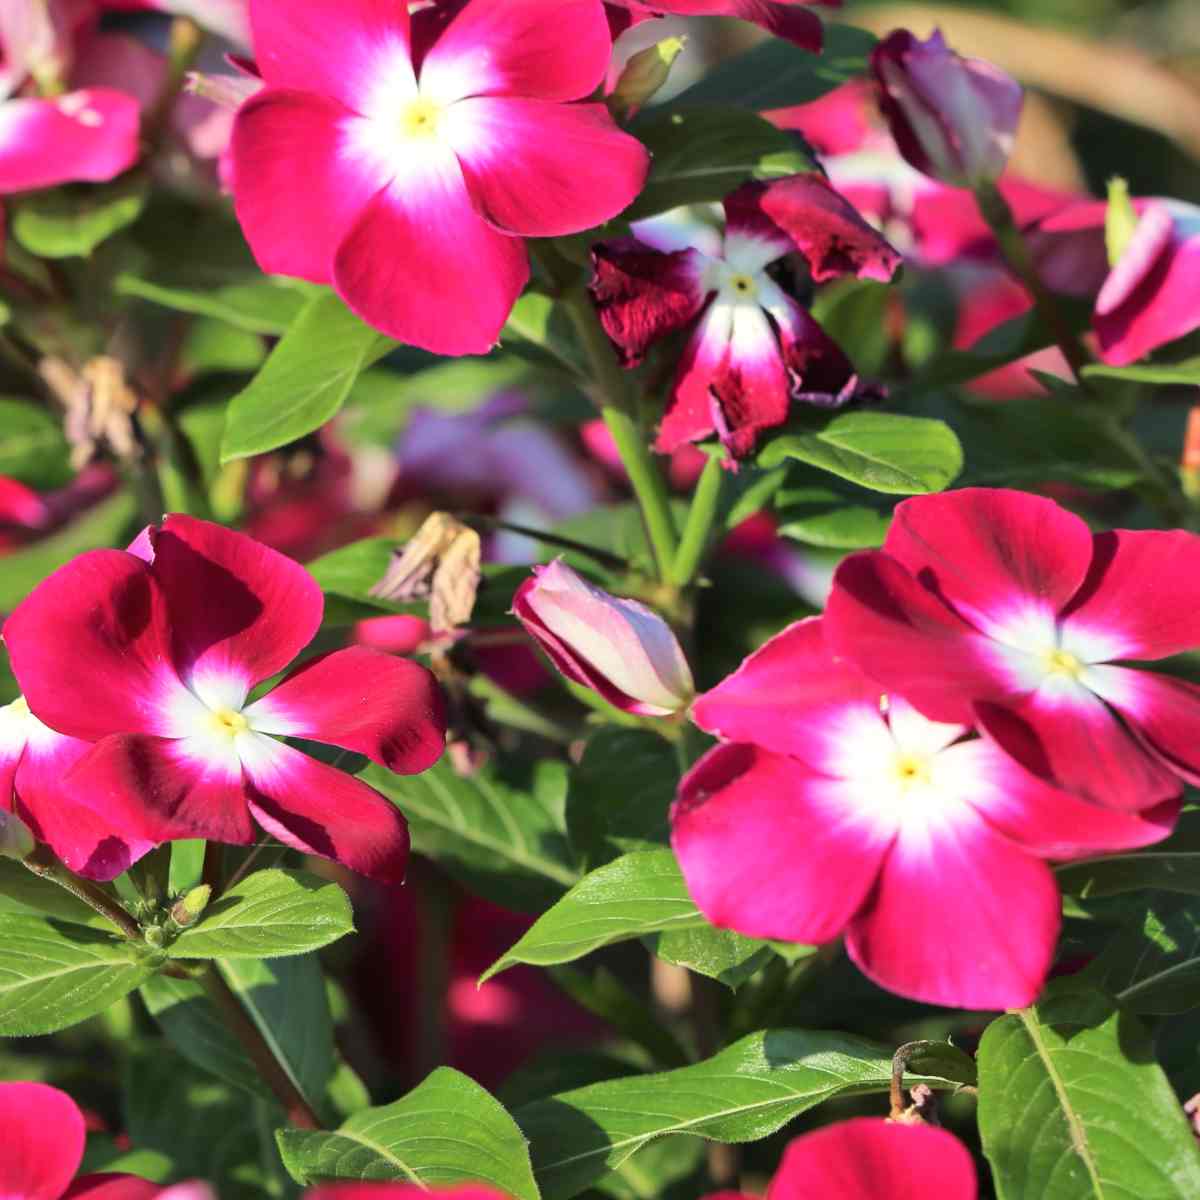 Red Madagascar Periwinkle with white halo